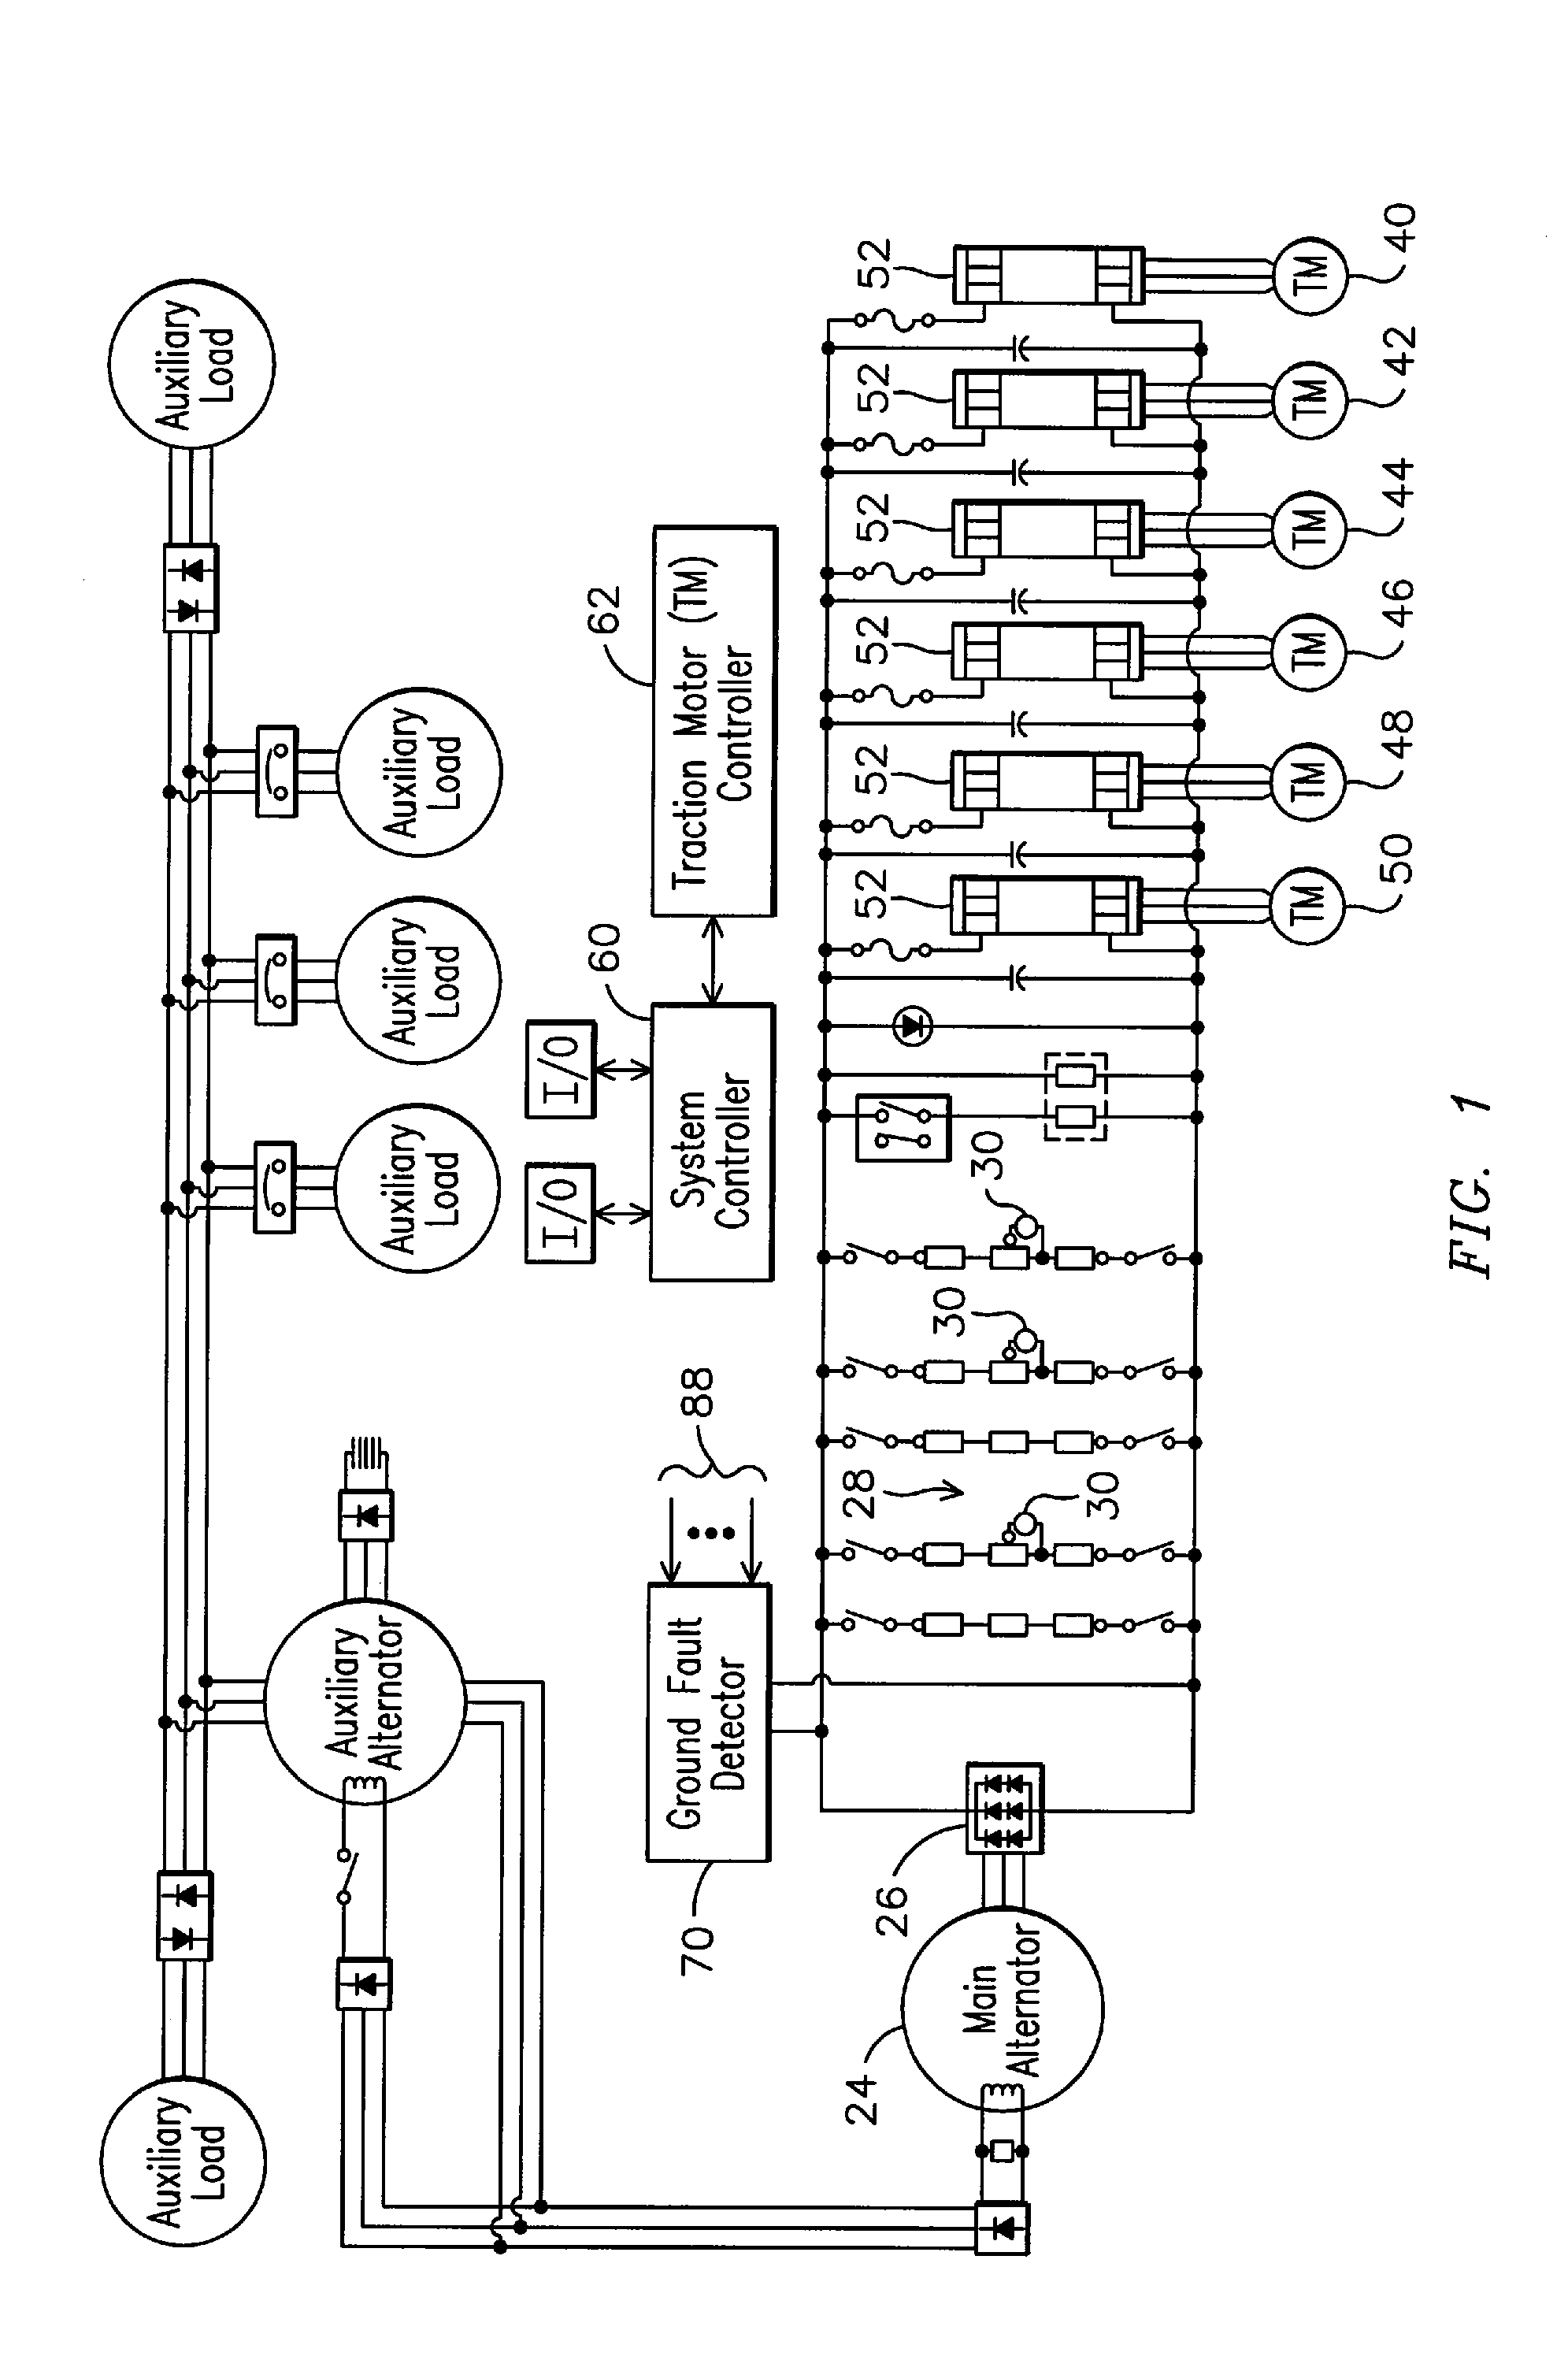 Method, apparatus and computer-readable code for detecting on the fly an incipient ground fault in an electrical propulsion system of a locomotive